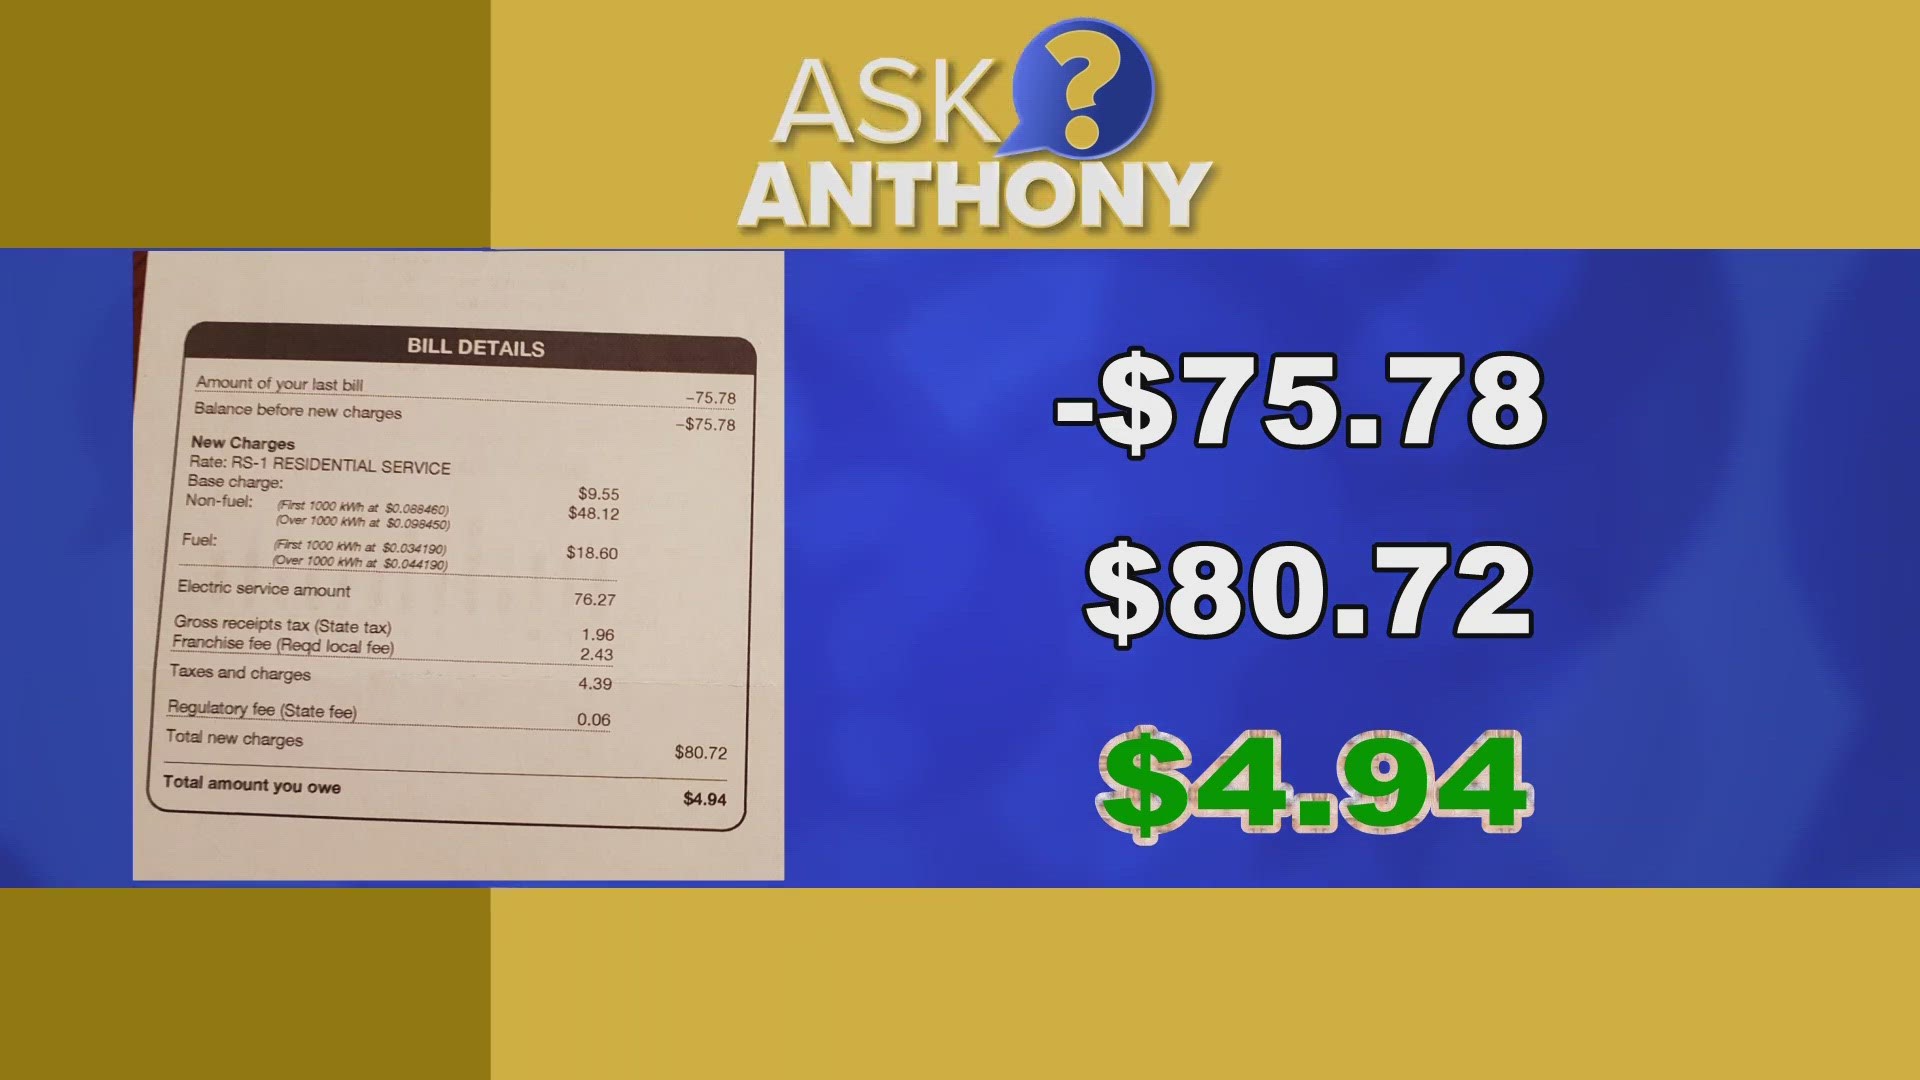 The woman contacted the Ask Anthony Team after she noticed her electric bill appeared too low.